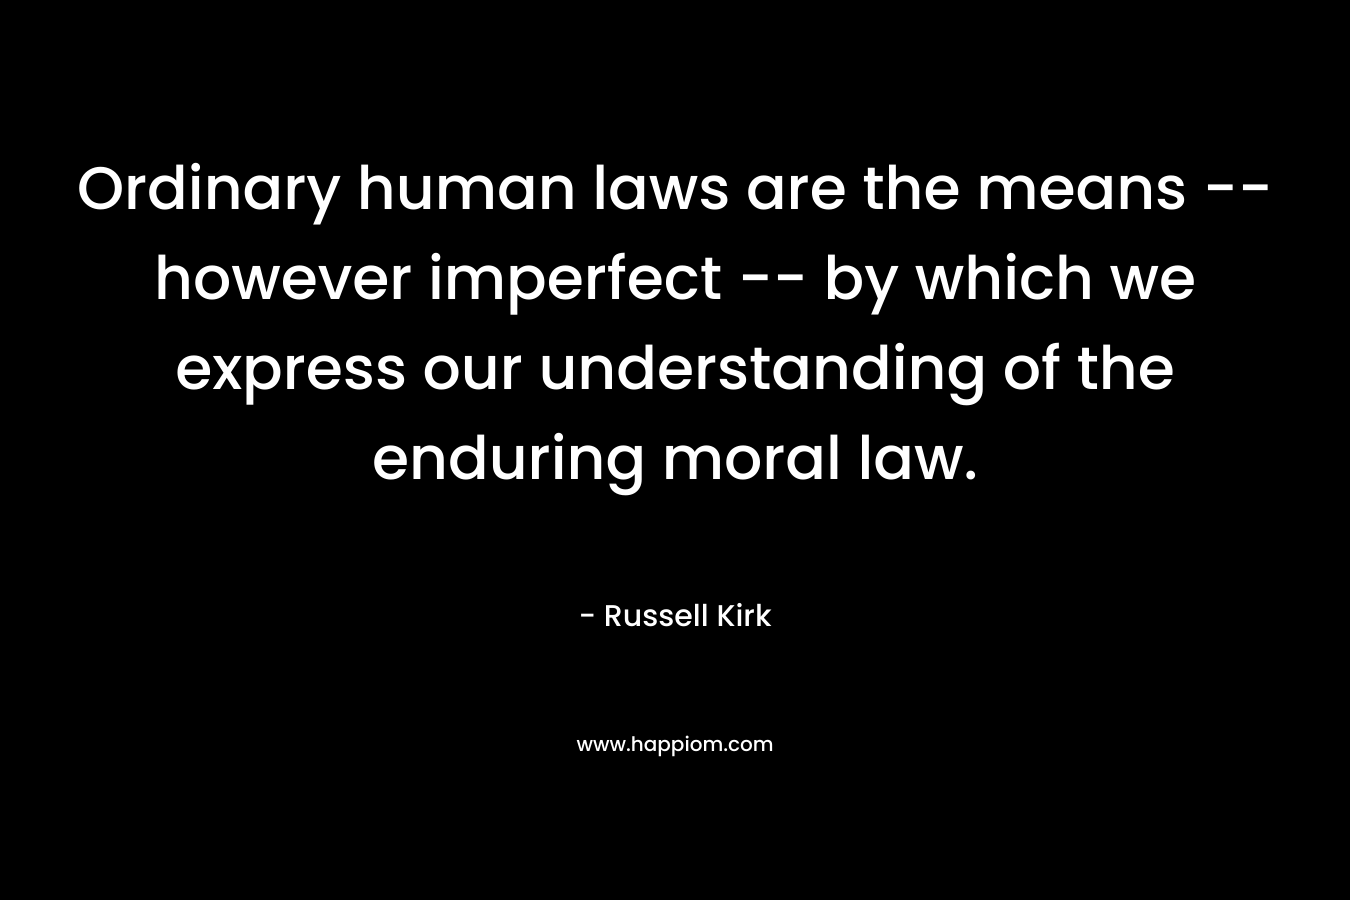 Ordinary human laws are the means — however imperfect — by which we express our understanding of the enduring moral law. – Russell Kirk